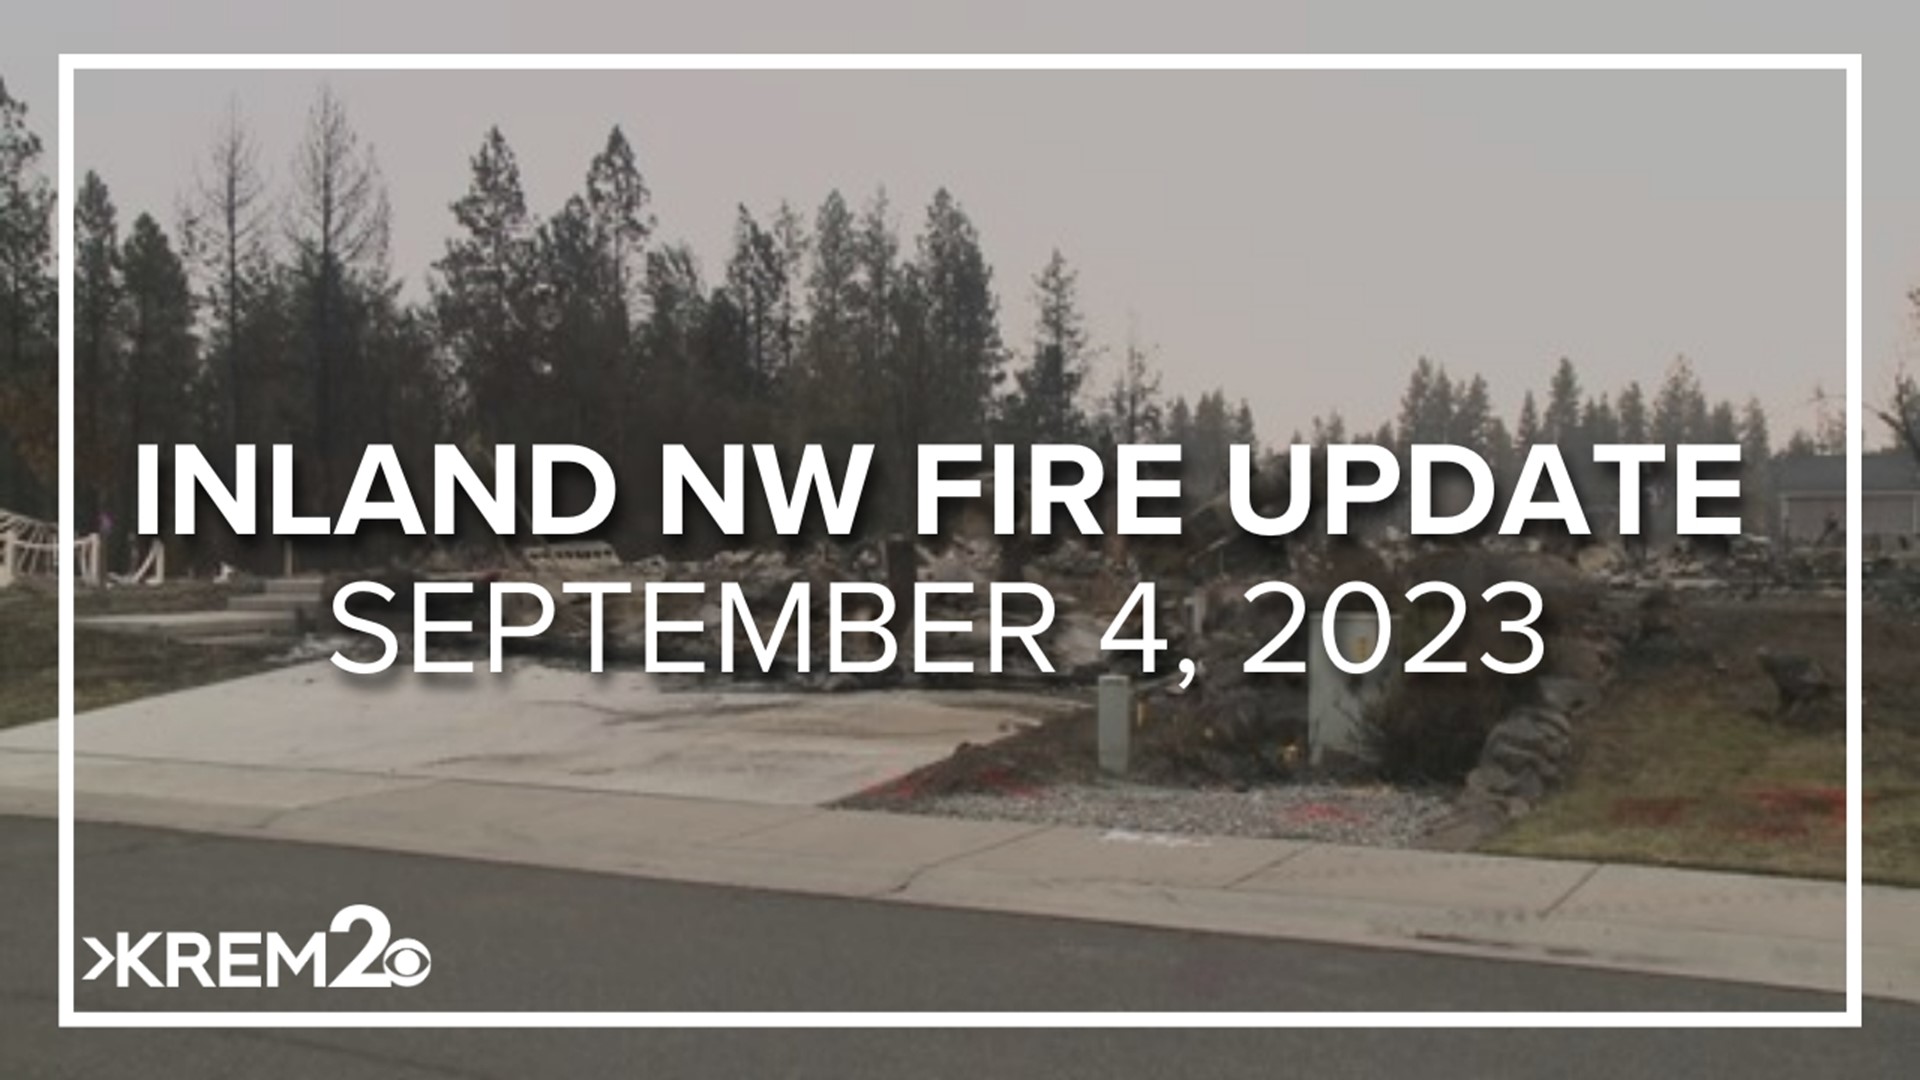 The Inland Northwest has several fires burning including two fires in Spokane County, one in Kootenai County, one in Bonner County and another in Orofino.